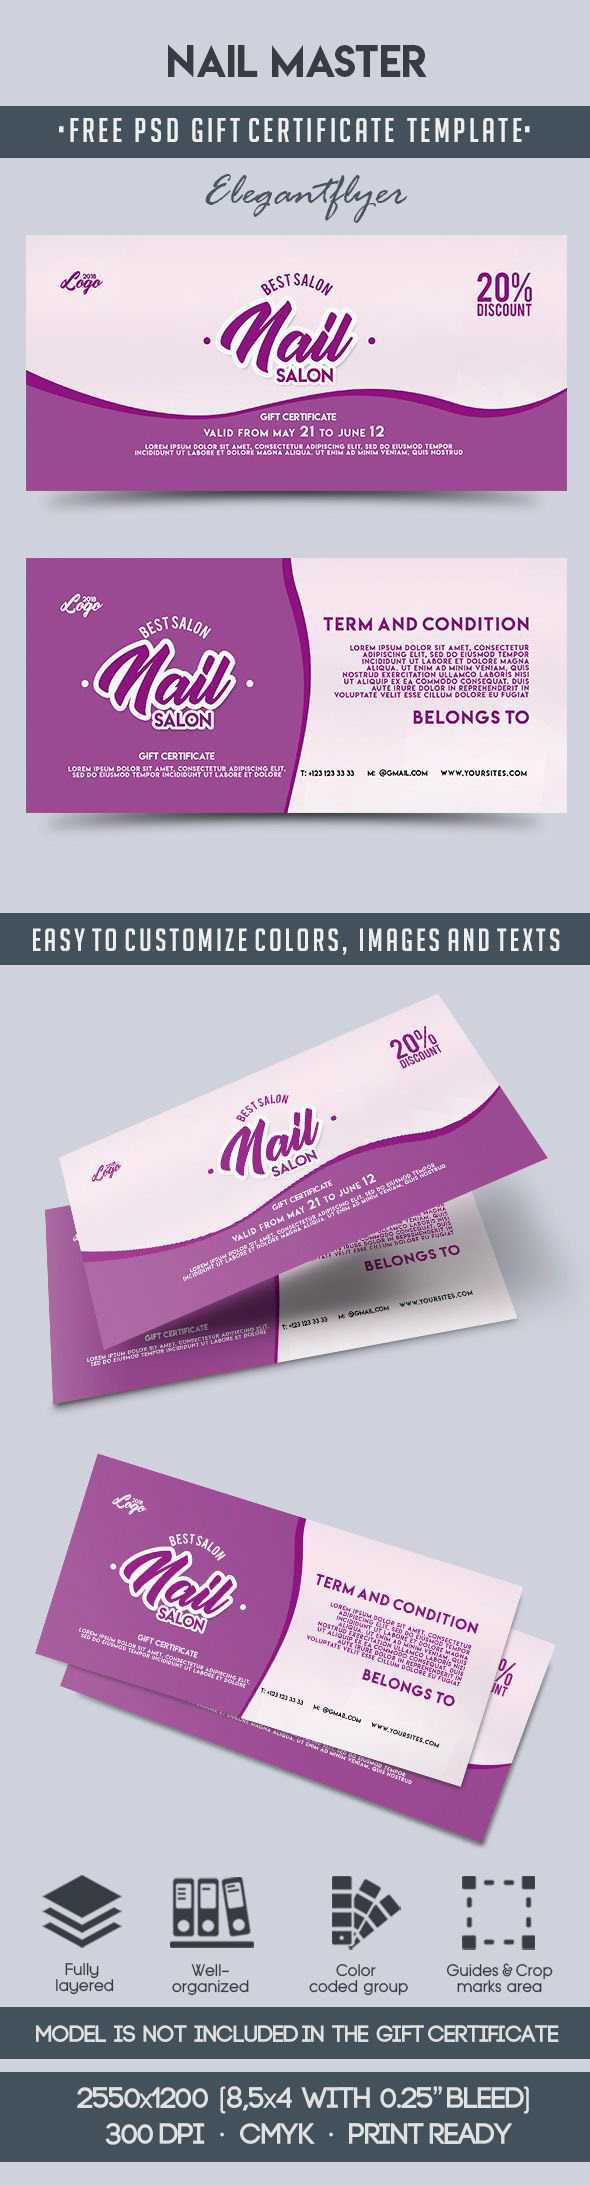 Nail Master – Free Gift Certificate Psd Template On Behance Pertaining To Nail Gift Certificate Template Free